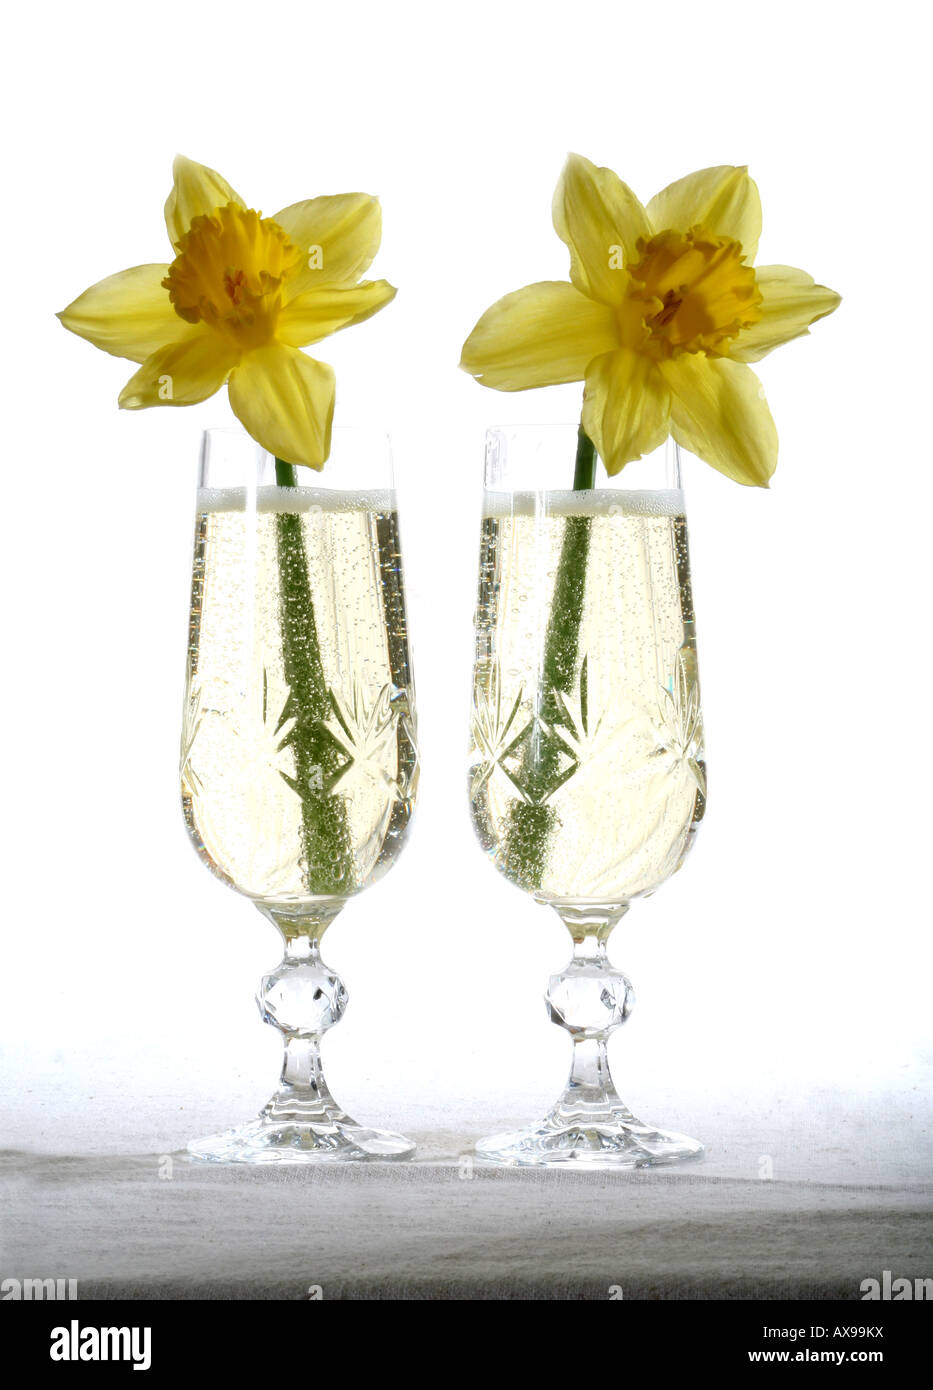 Glasses of Champagne and daffodils Stock Photo